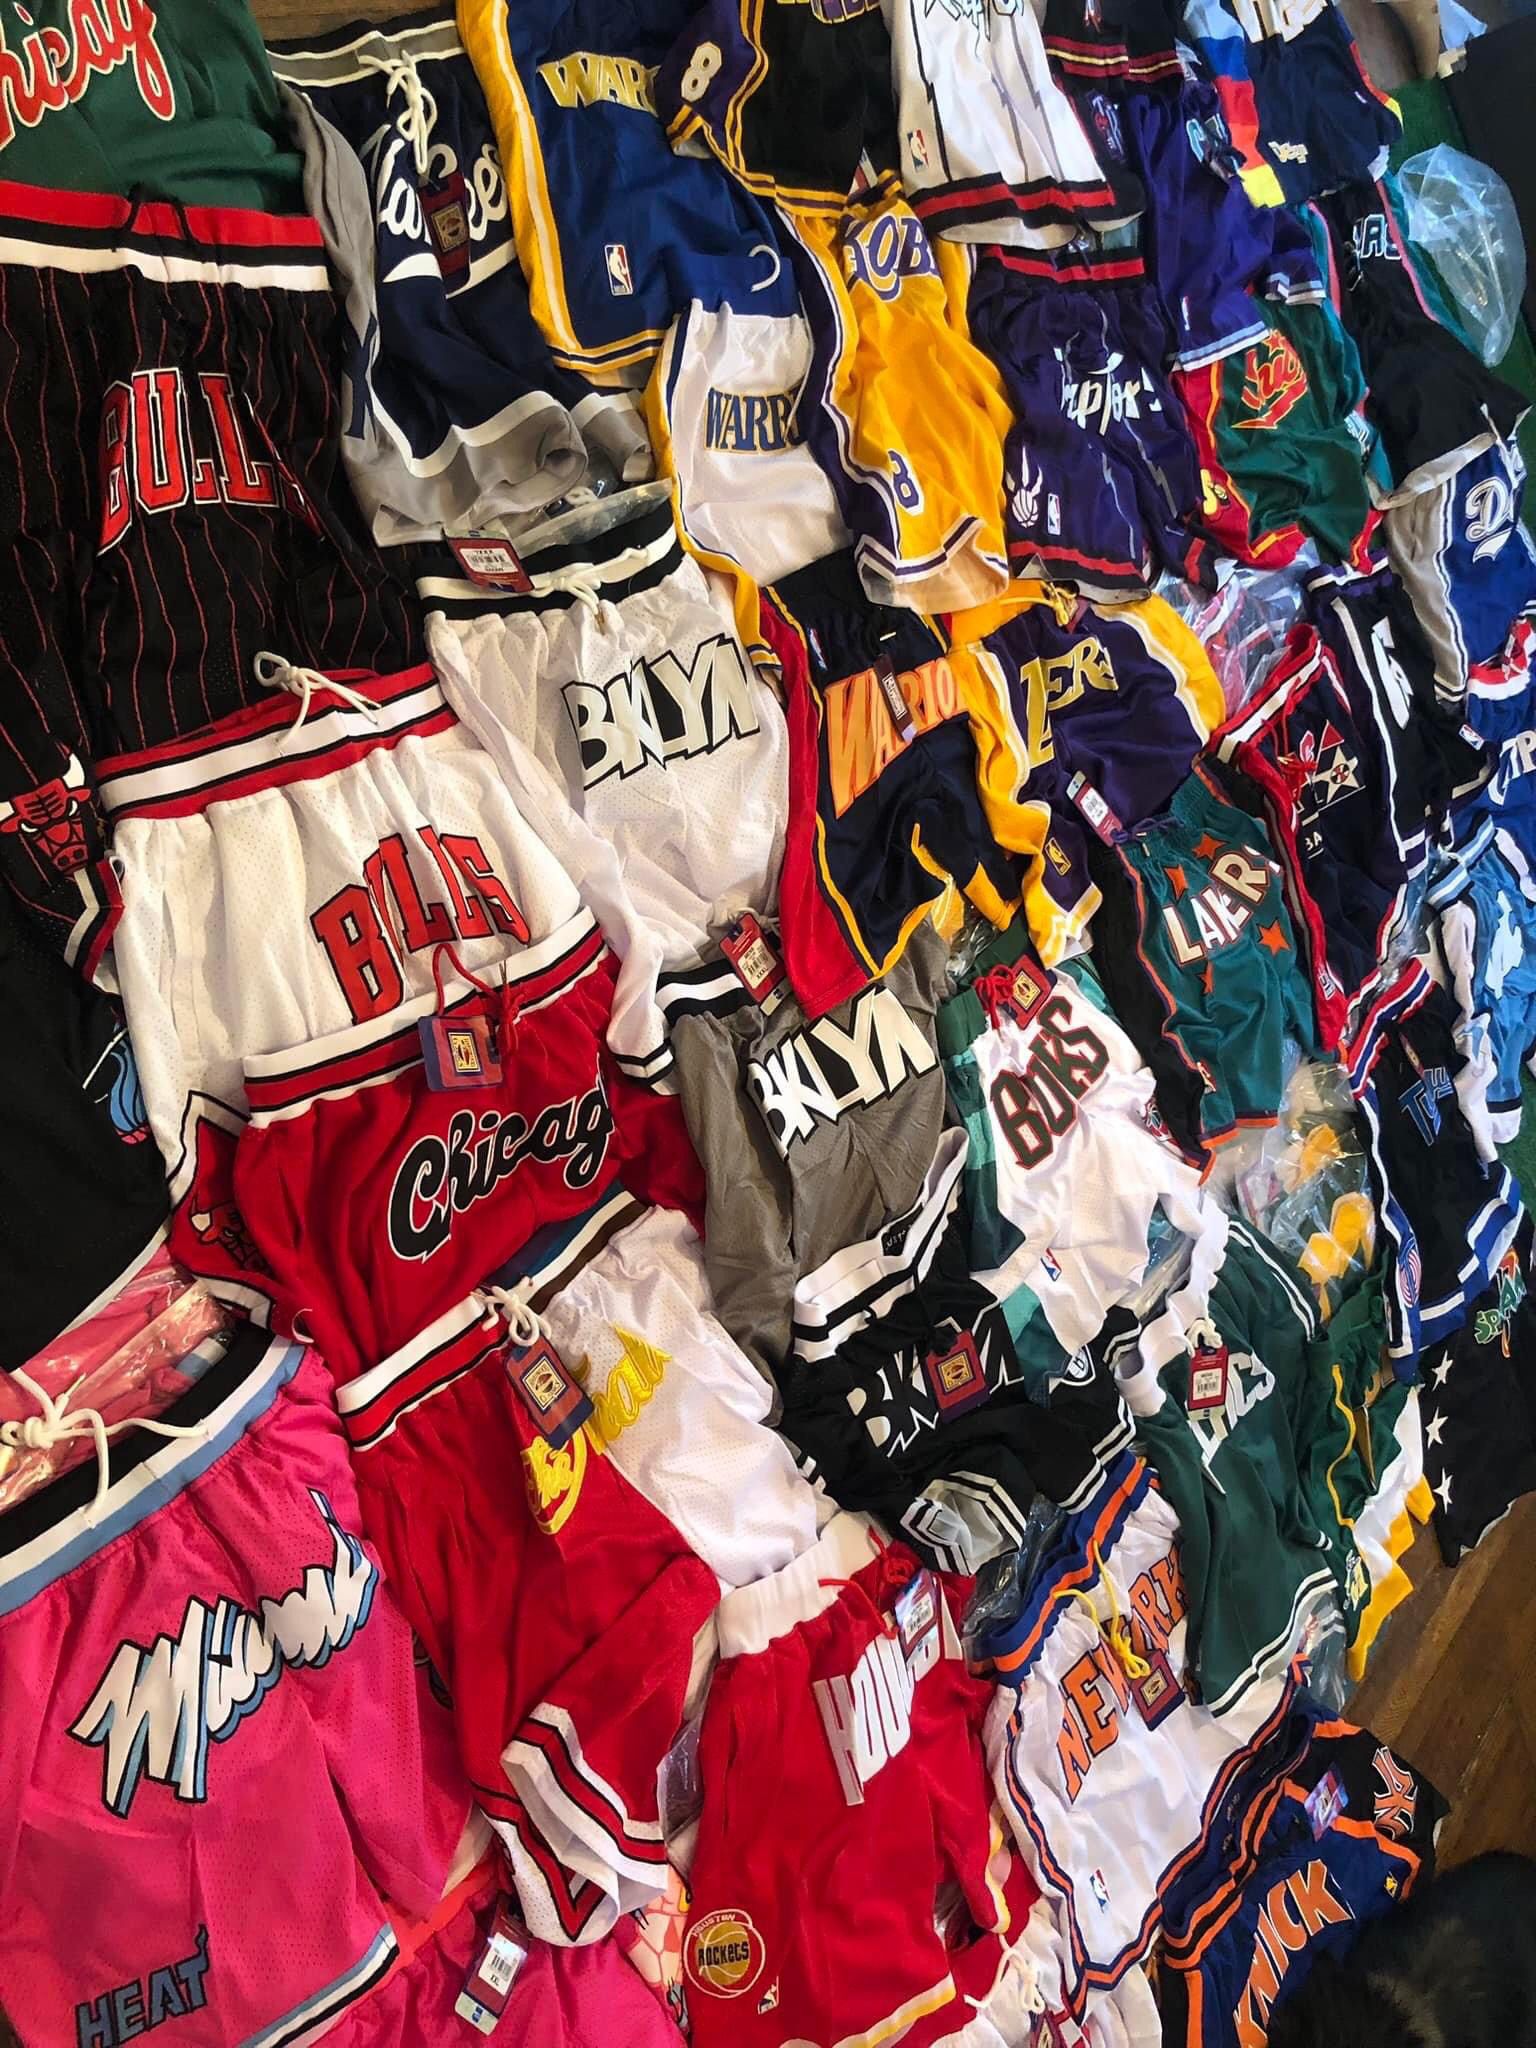 Vintage NBA Basketball Shorts for Sale in Ellicott, NY - OfferUp